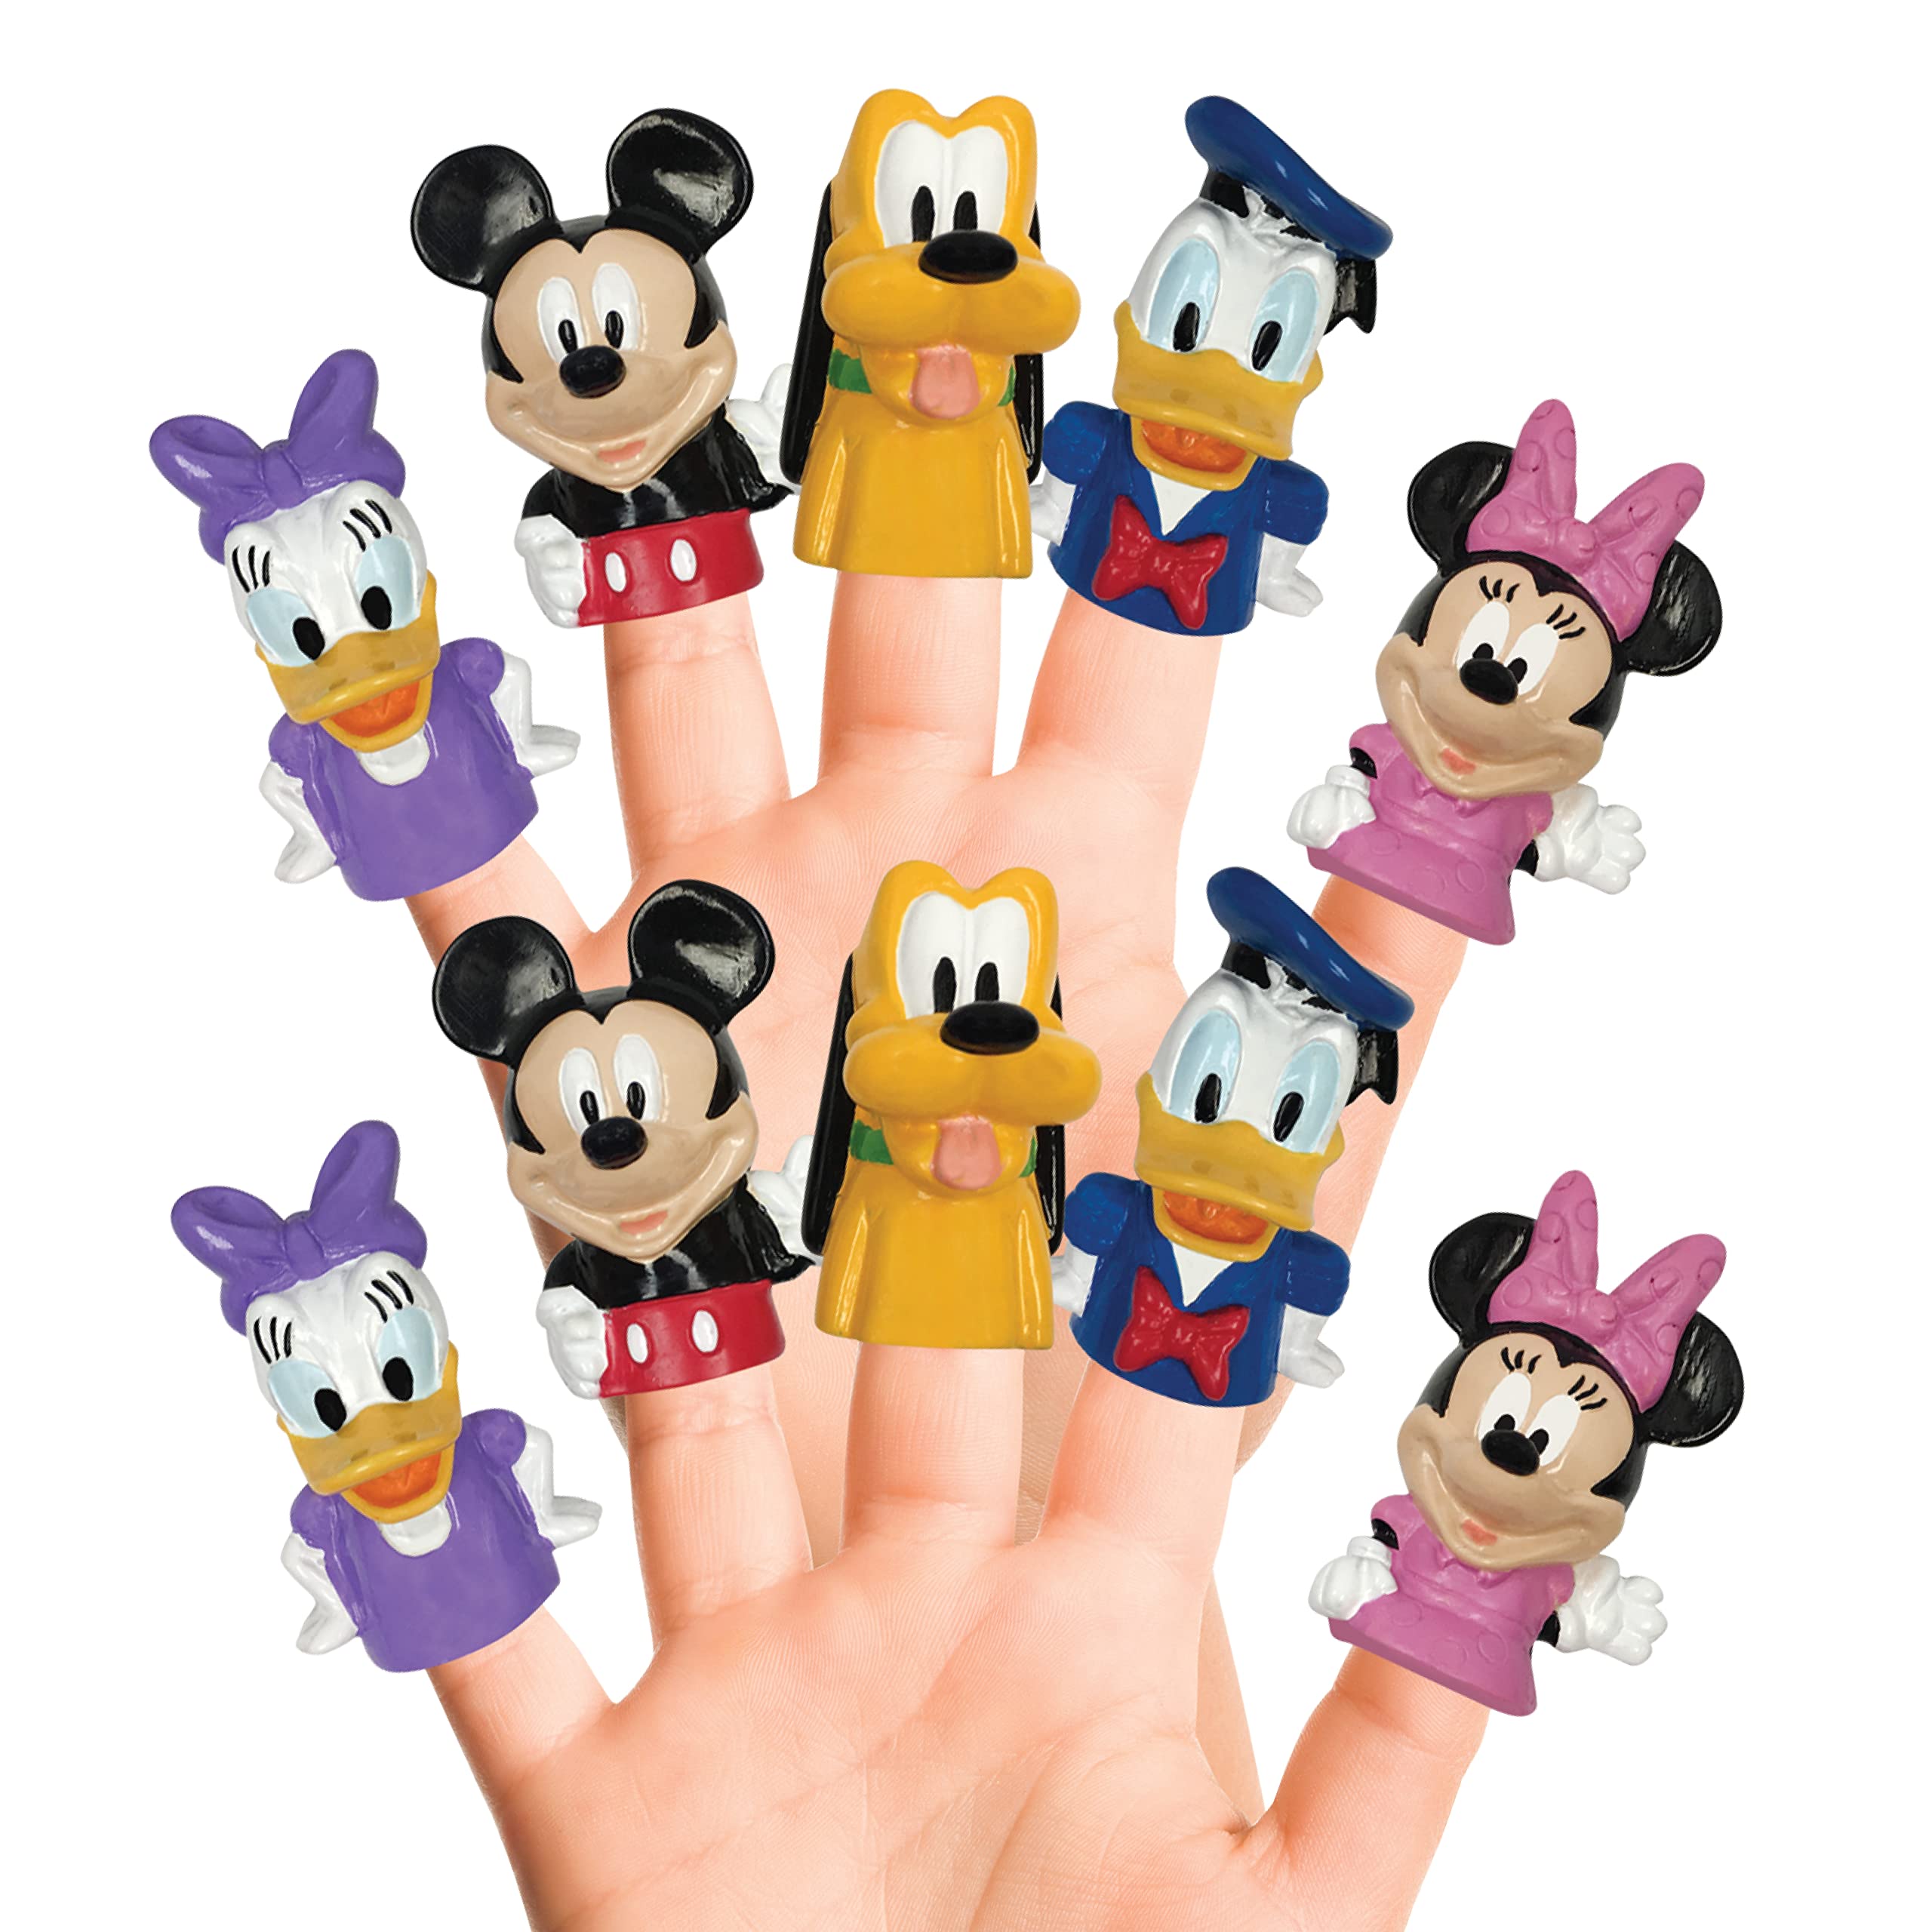 Disney Mickey Mouse & Friends 10 Piece Finger Puppet Set –Party Favors, Educational, Bath Toys, Floating Pool Toys, Beach Toys, Finger Toys, Playtime